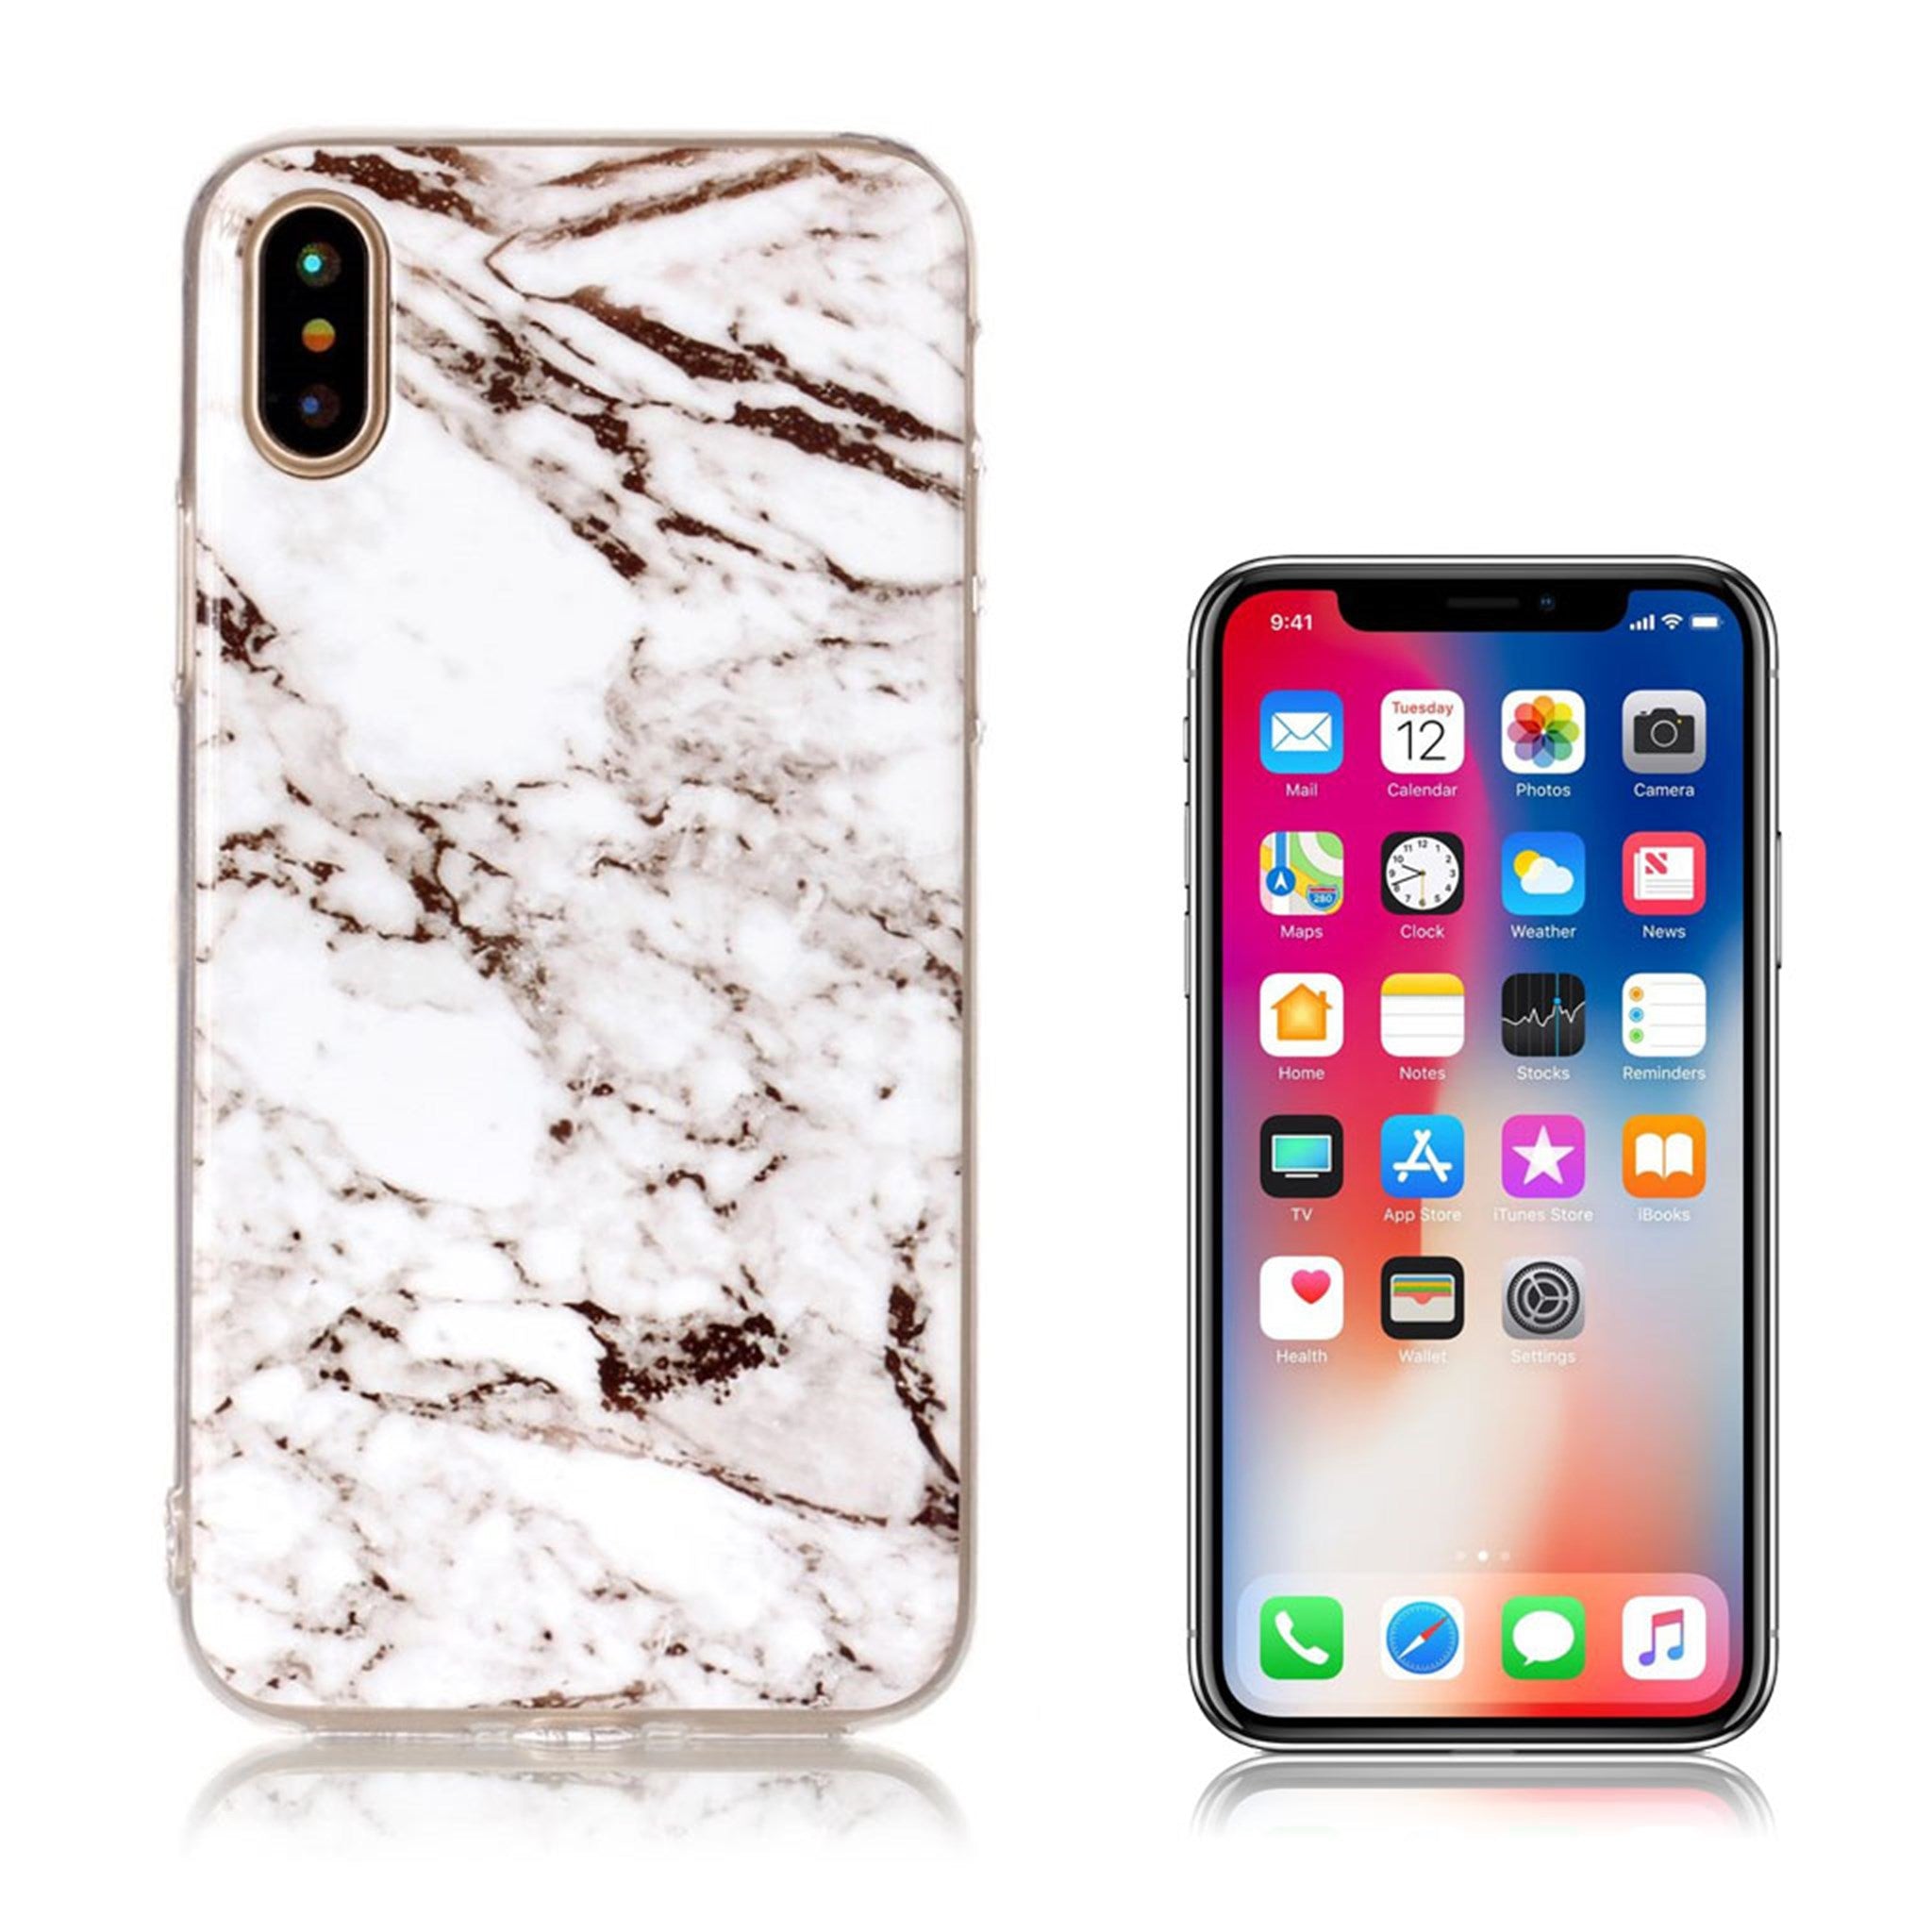 iPhone X marble pattern IMD TPU case - White / Brown